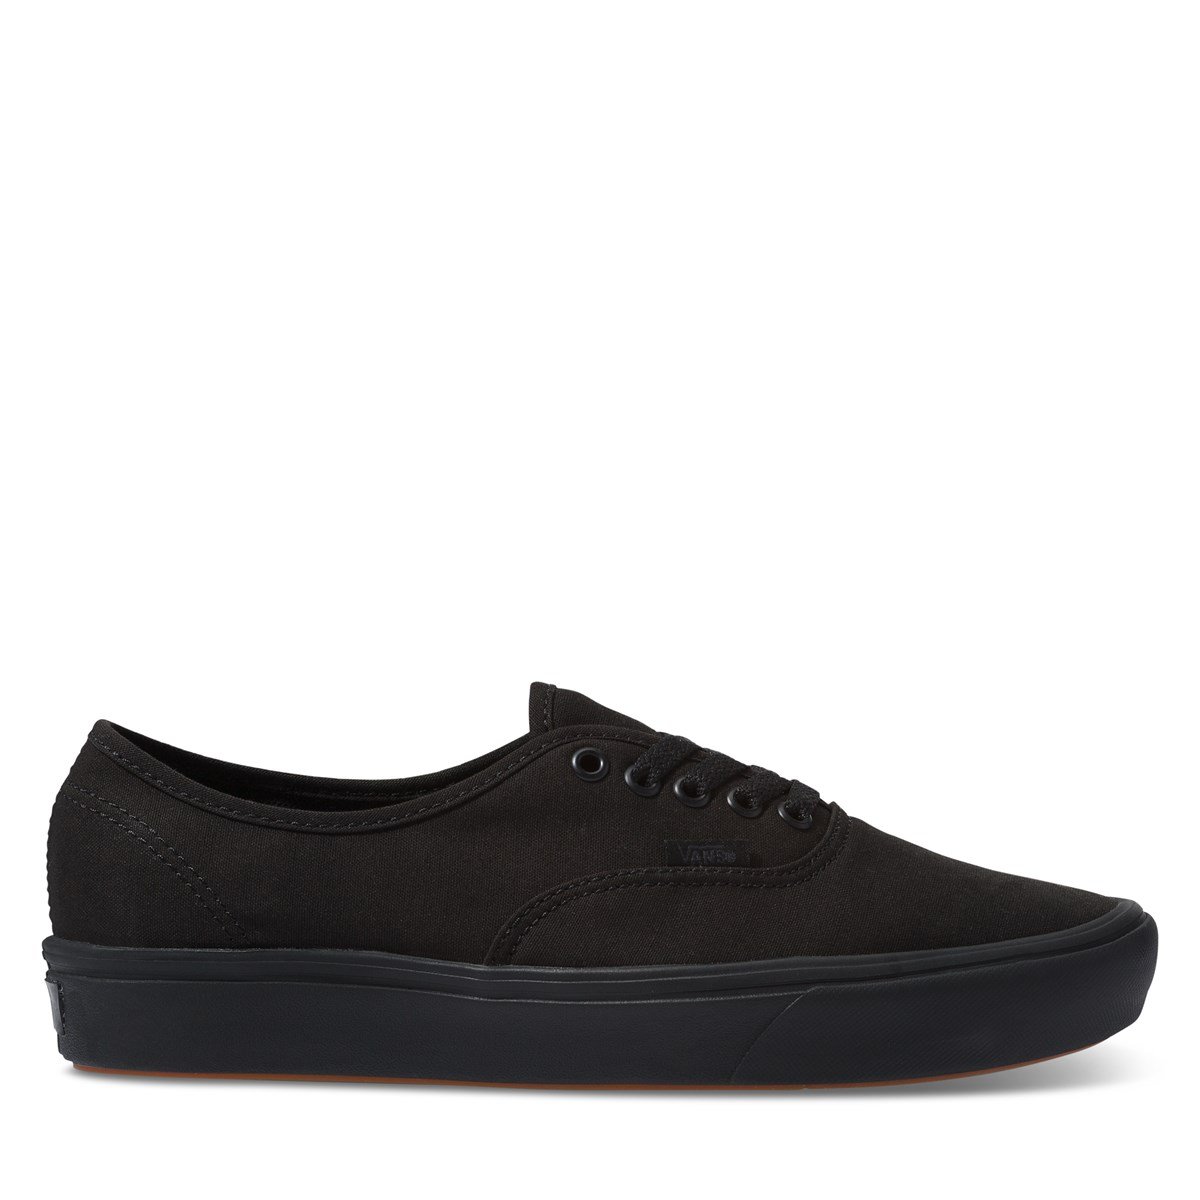 ComfyCush Authentic Sneakers in Black